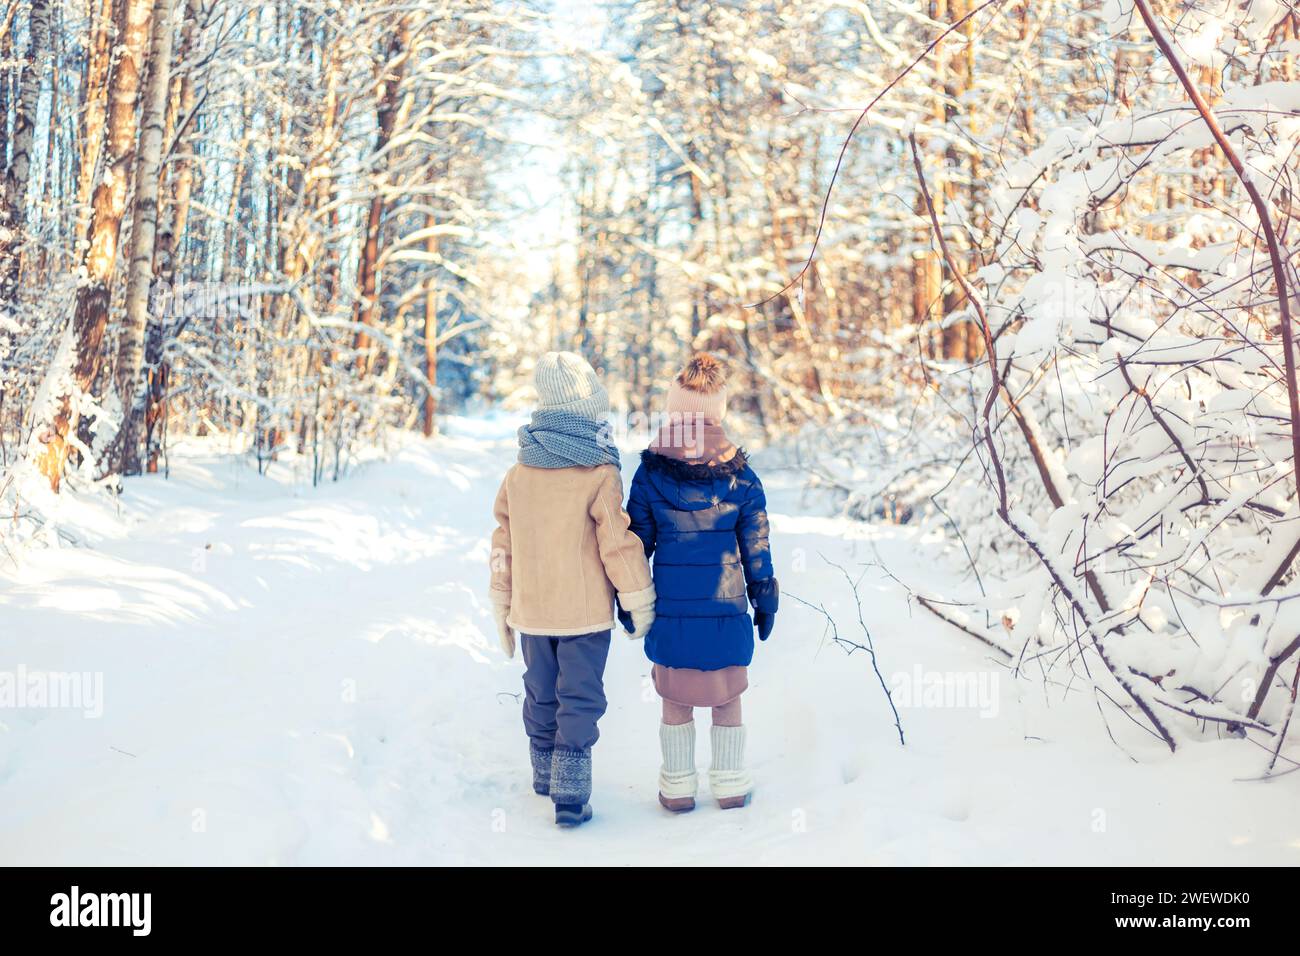 Children walk in a winter snowy forest. Frosty sunny day. Stock Photo